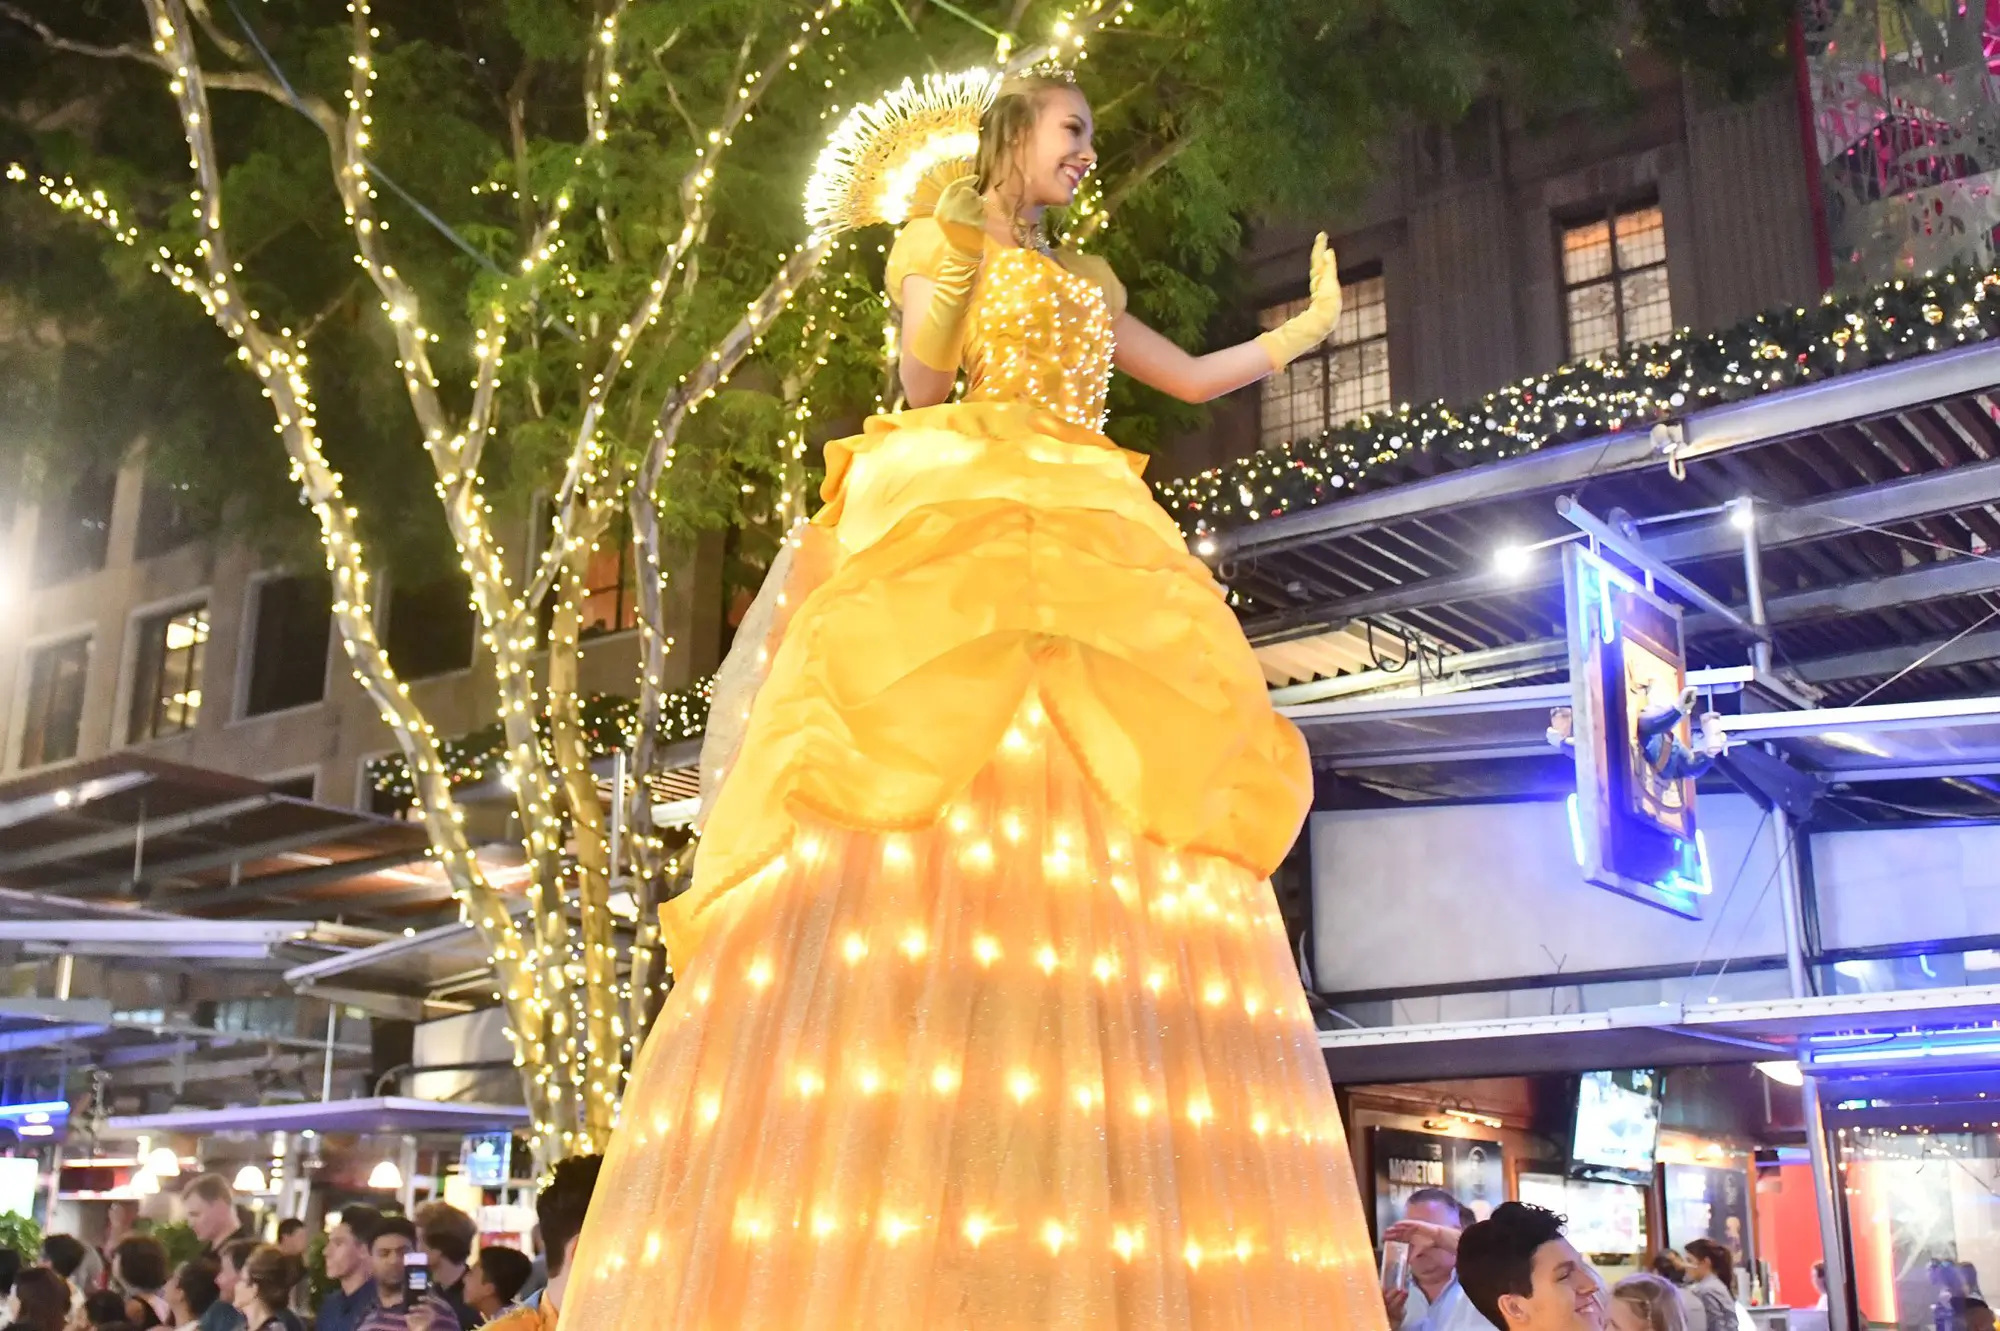 A 3.6 metre tall princess in a yellow dress covered with lights moves through the crowd of Queen Street Mall